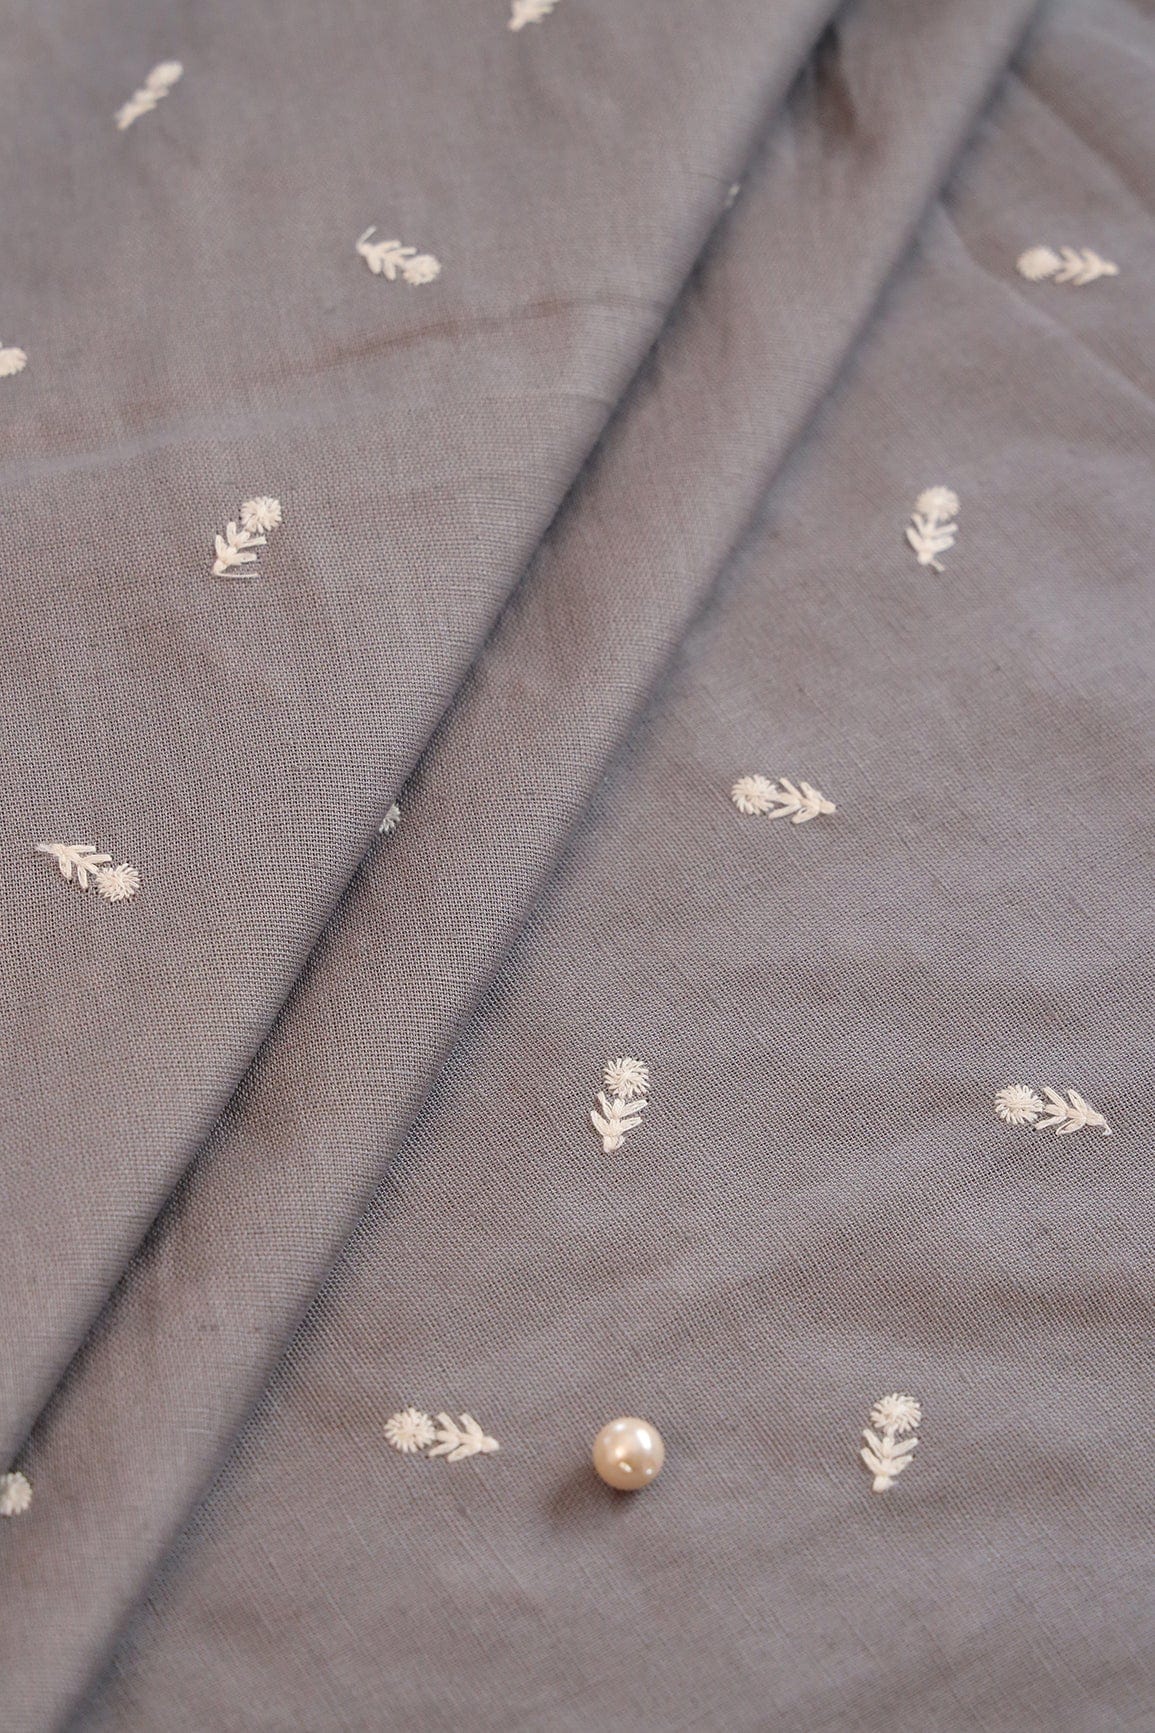 doeraa Embroidery Fabrics White Thread Small Floral Motif Embroidery Work On Grey Cotton Linen Fabric